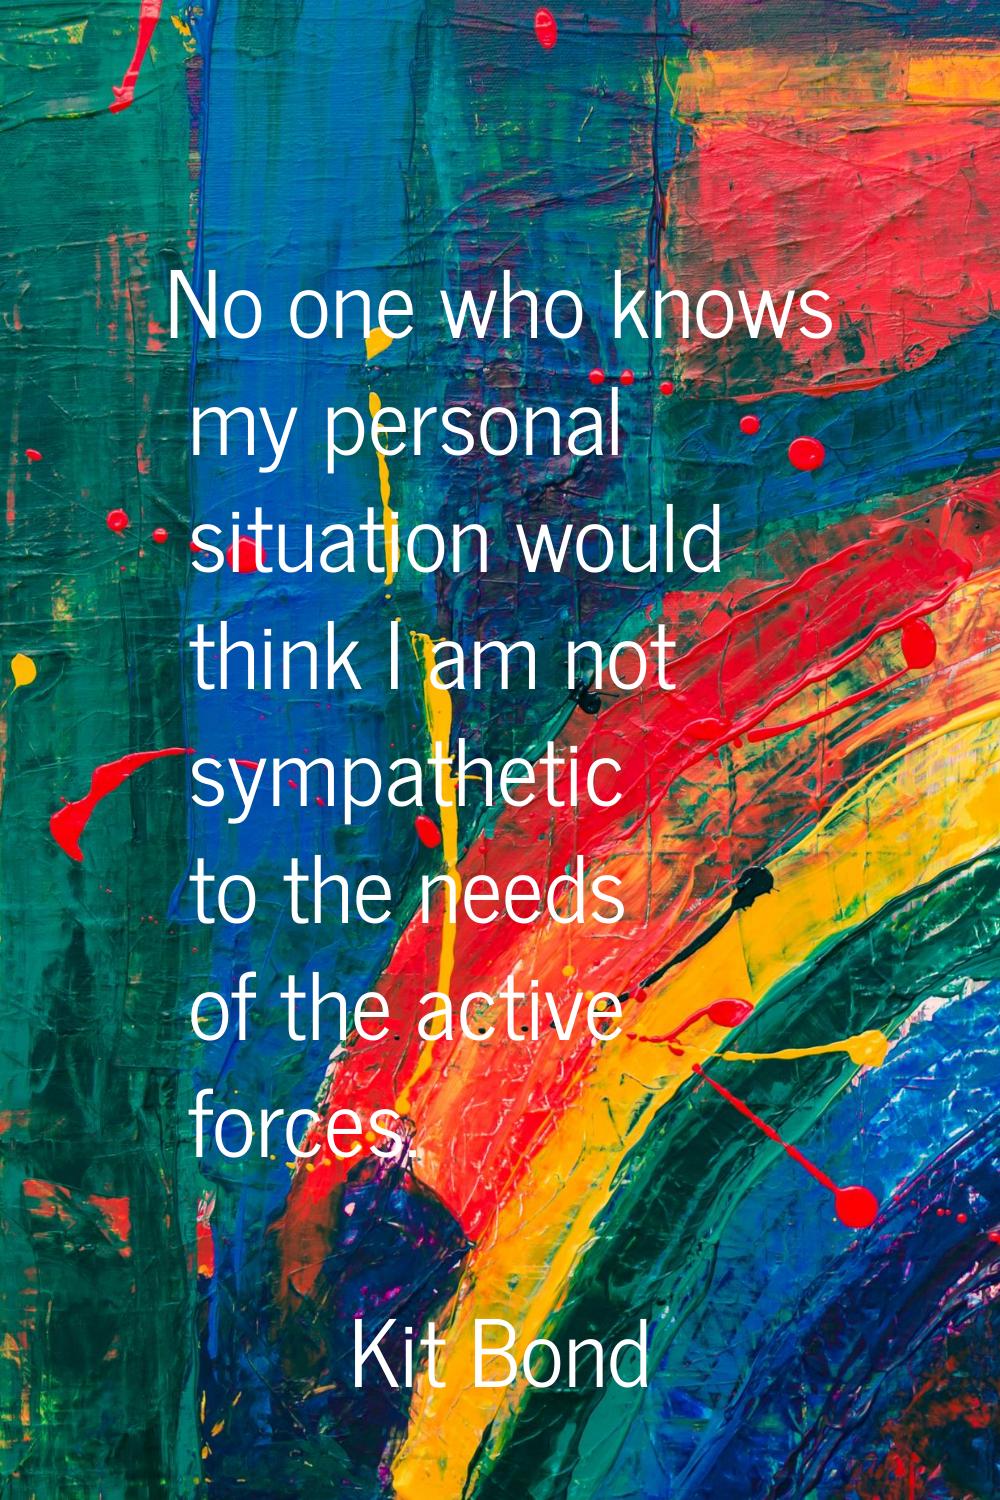 No one who knows my personal situation would think I am not sympathetic to the needs of the active 